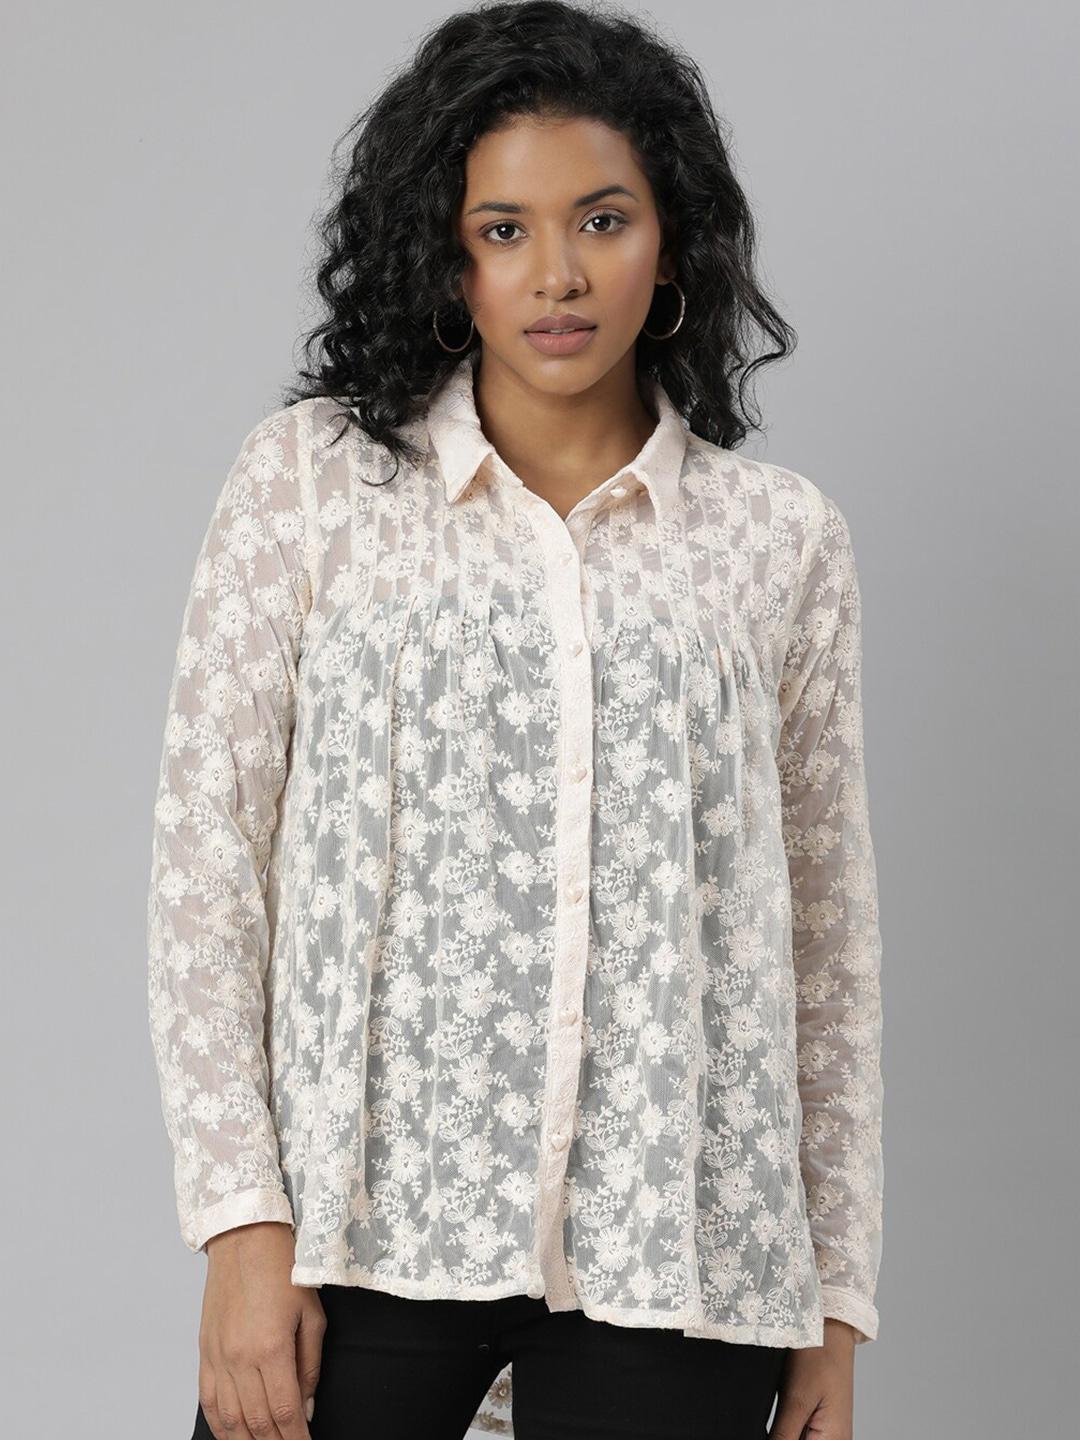 showoff-floral-embroidered-shirt-collar-semi-sheer-shirt-style-top